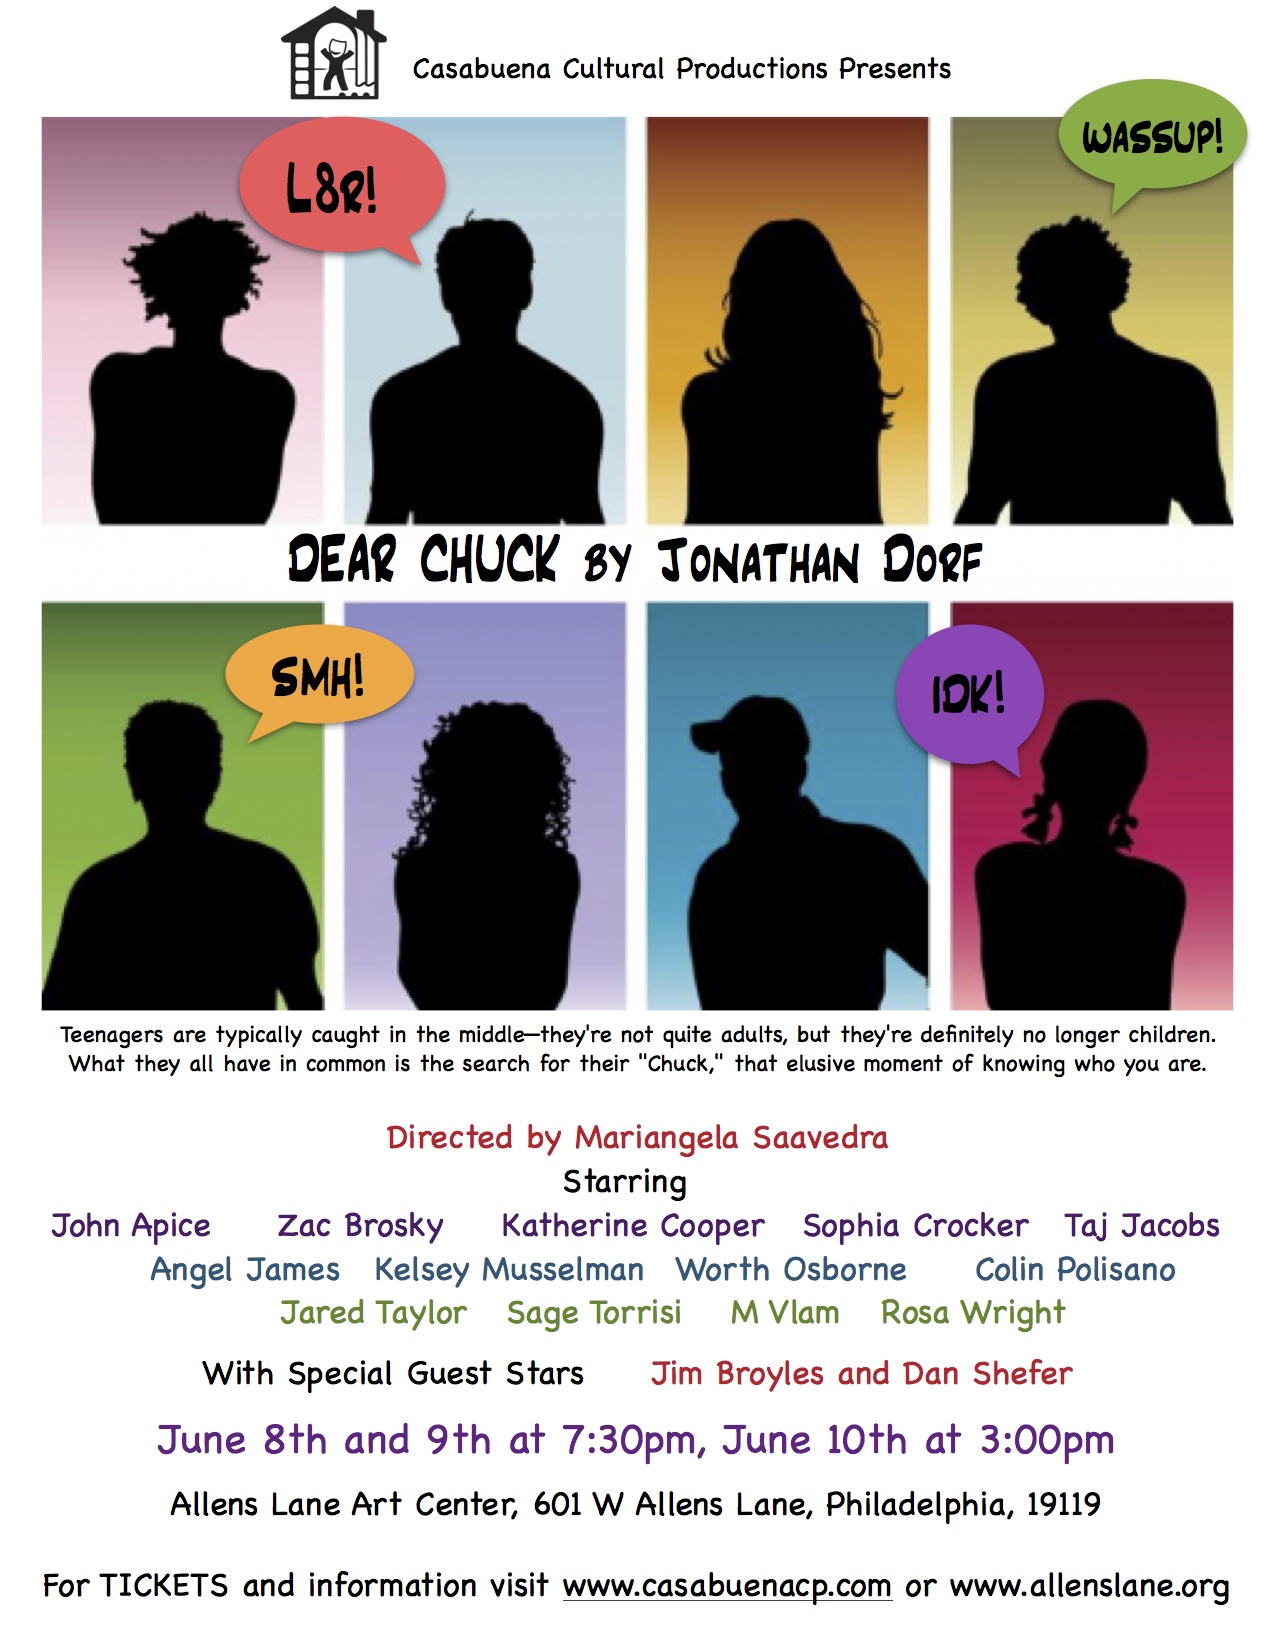 WE HAVE A CAST!! Dear Chuck is coming to Allens Lane on June 8th-10th!